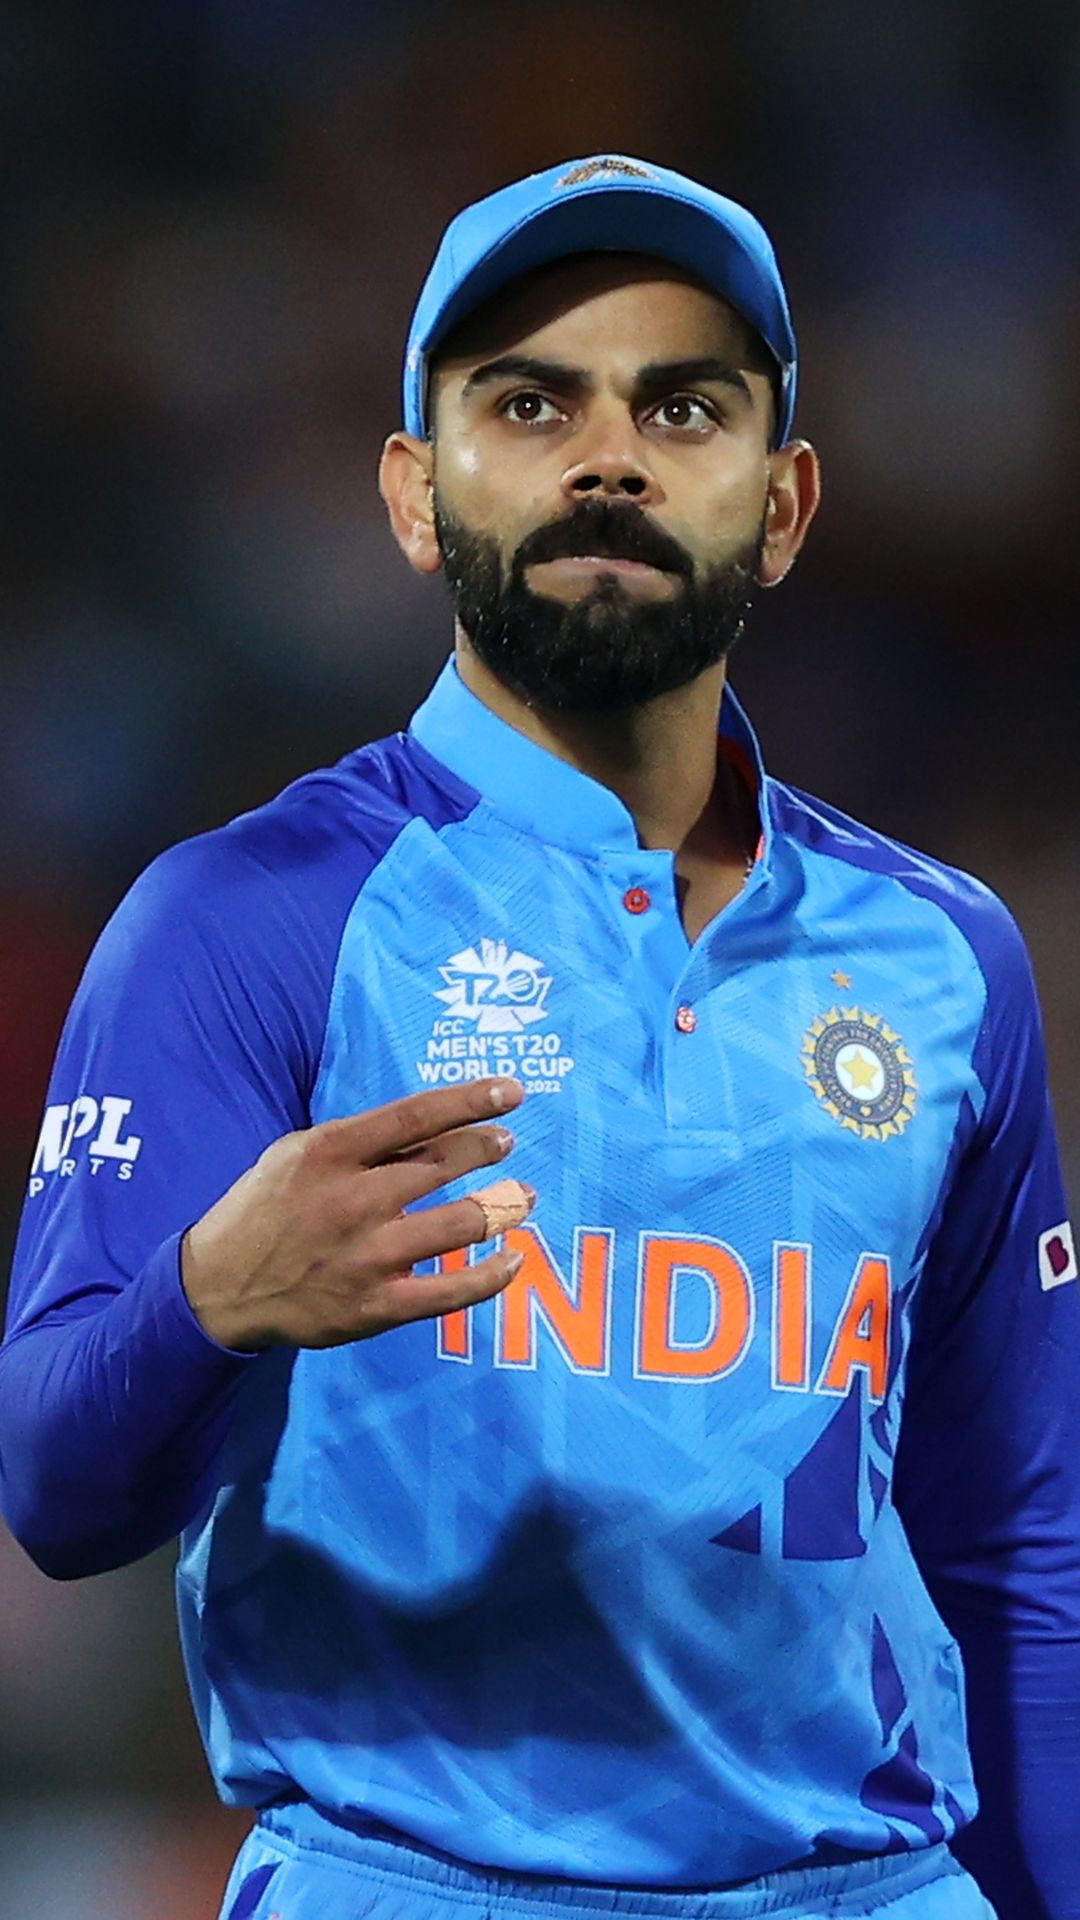 Virat Kohli's performance in every T20 World Cup edition